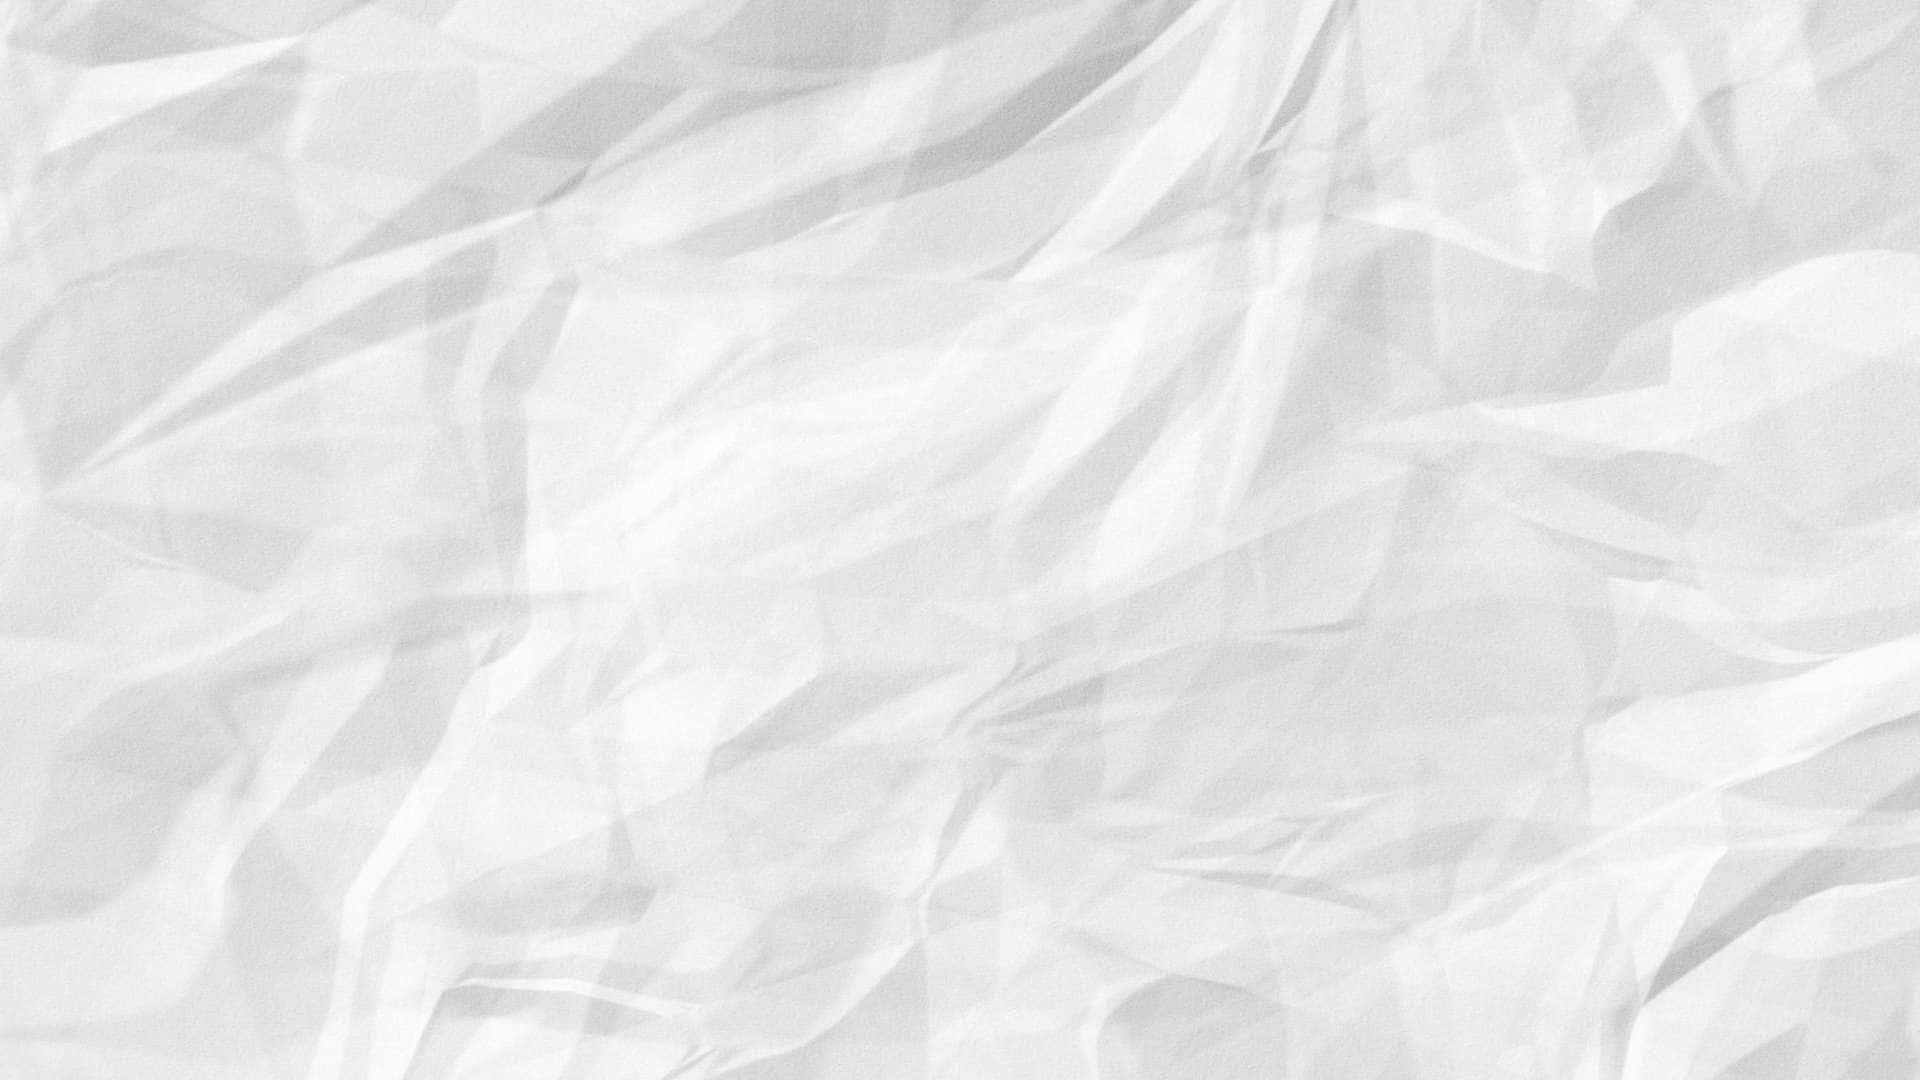 Wrinkled Paper Texture Background Wallpaper